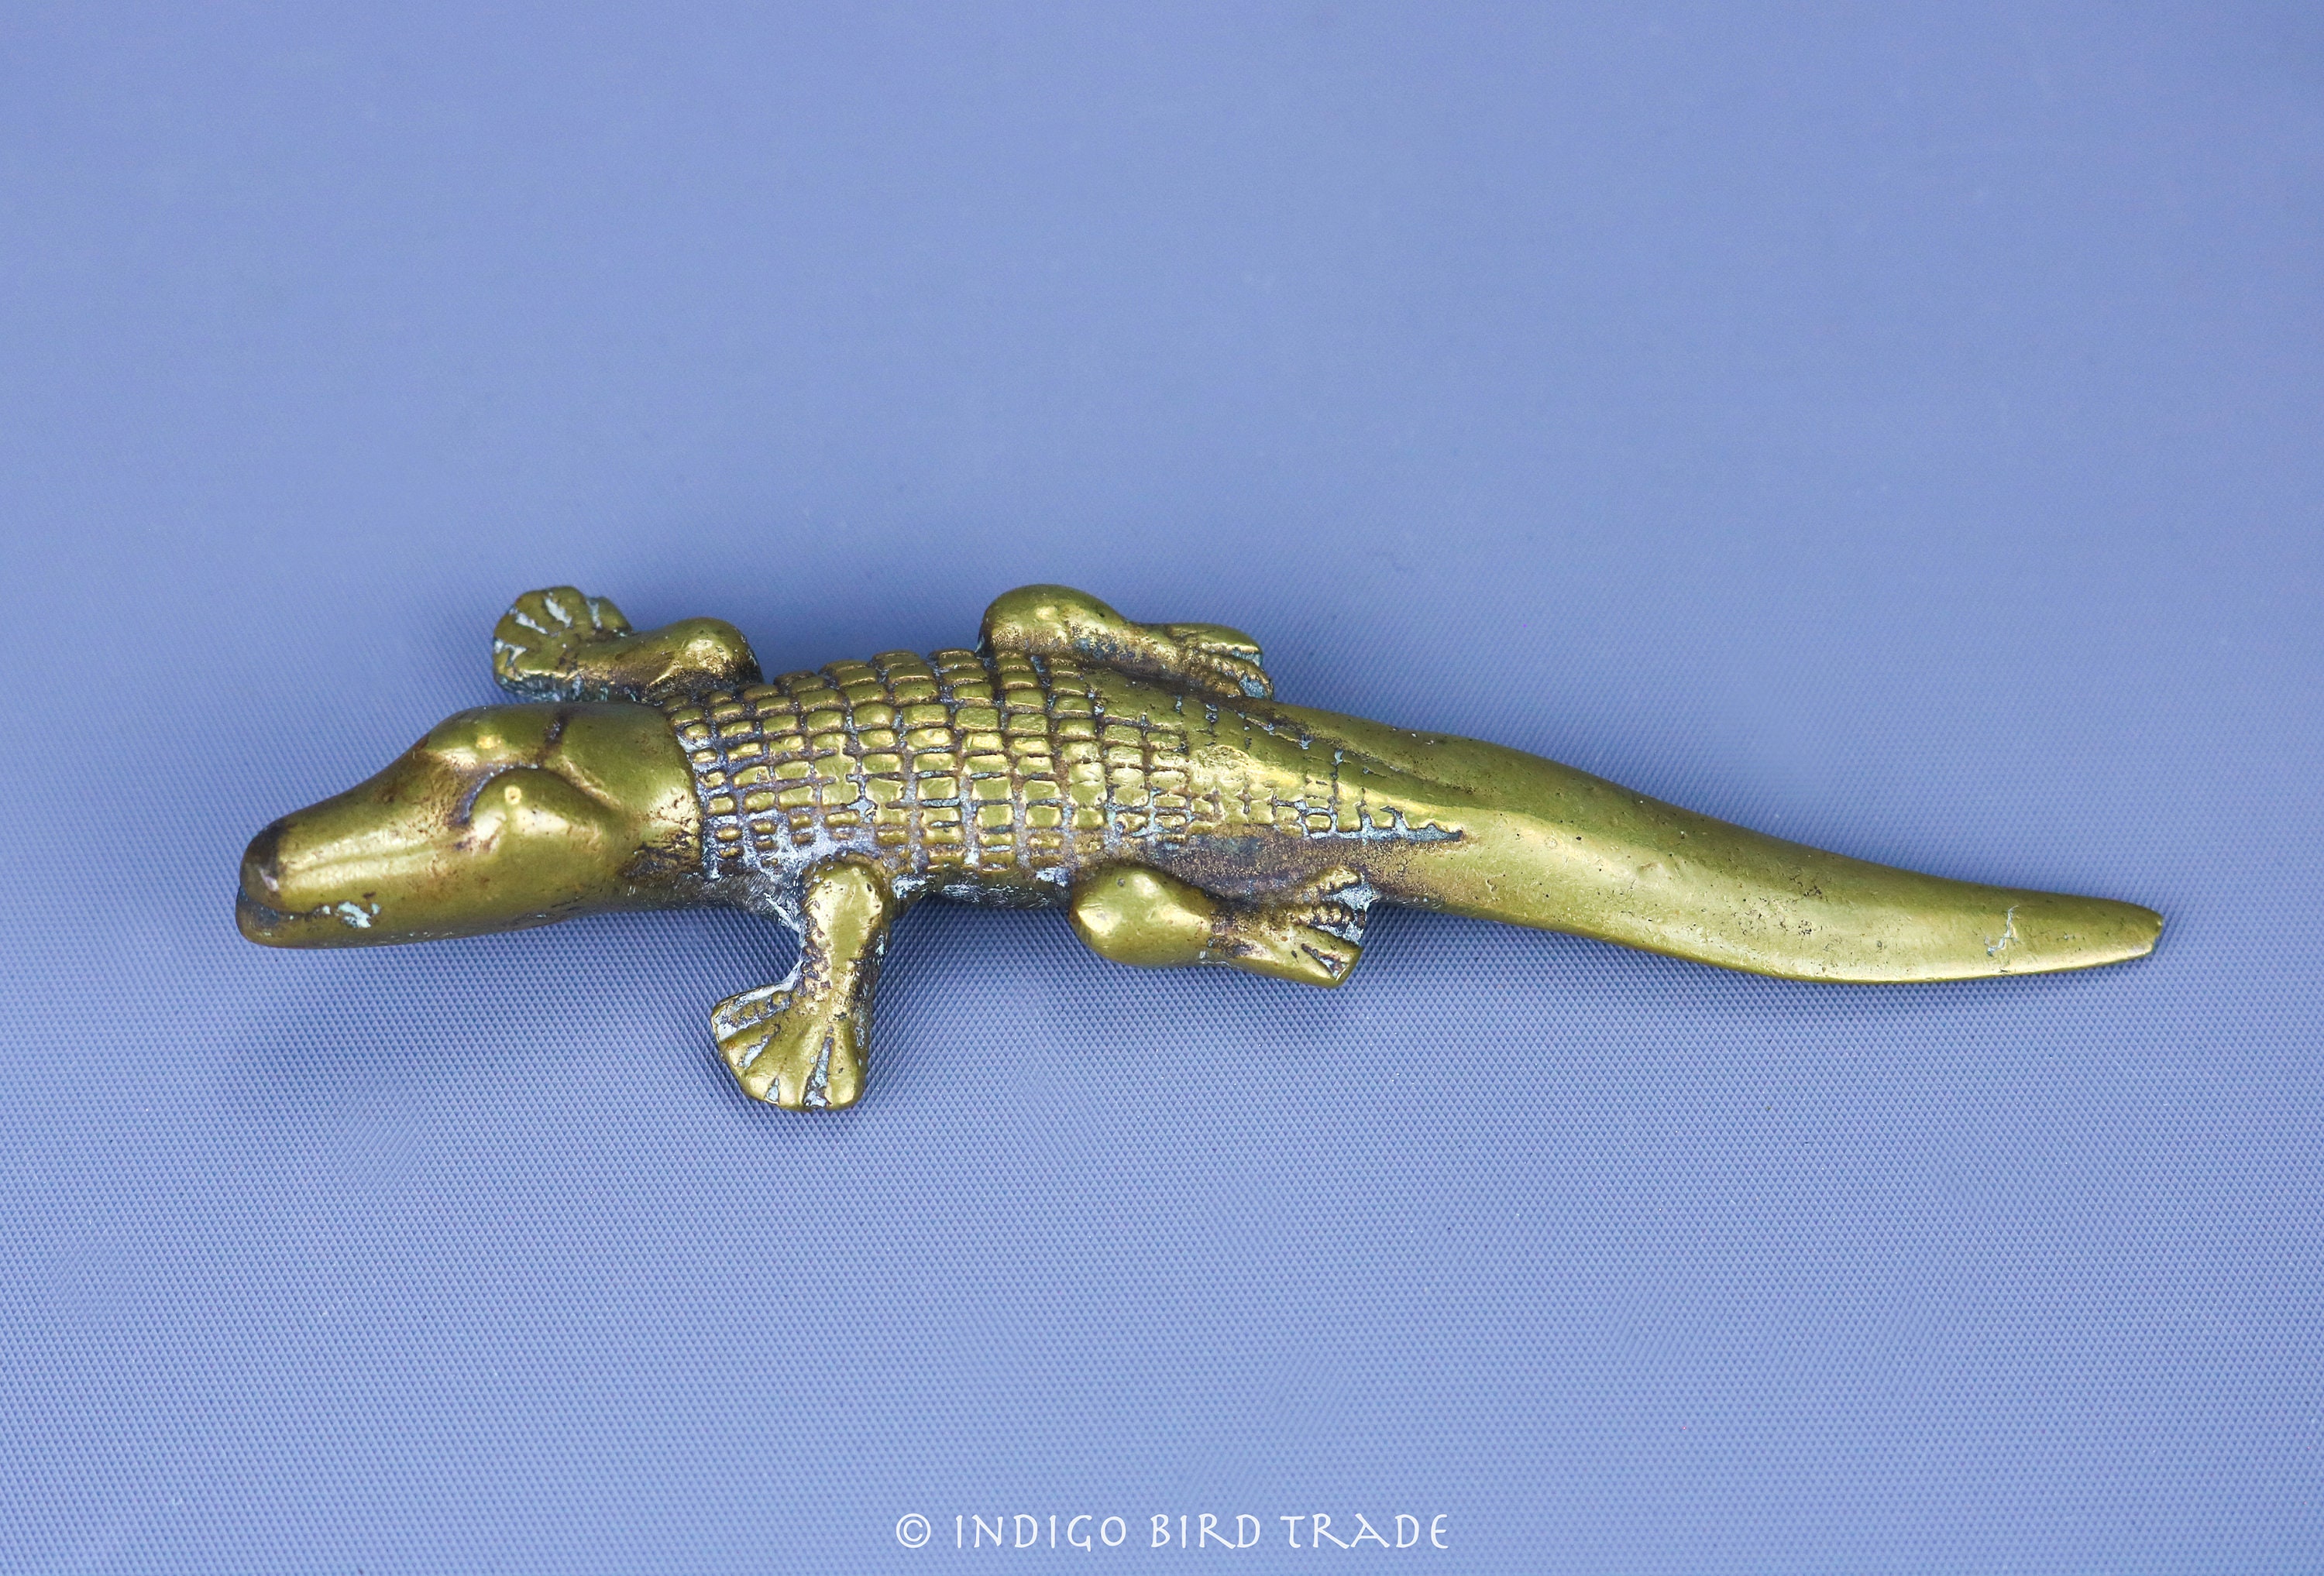 At Auction: 19TH C. FRENCH ALLIGATOR FOOD CHOPPER.